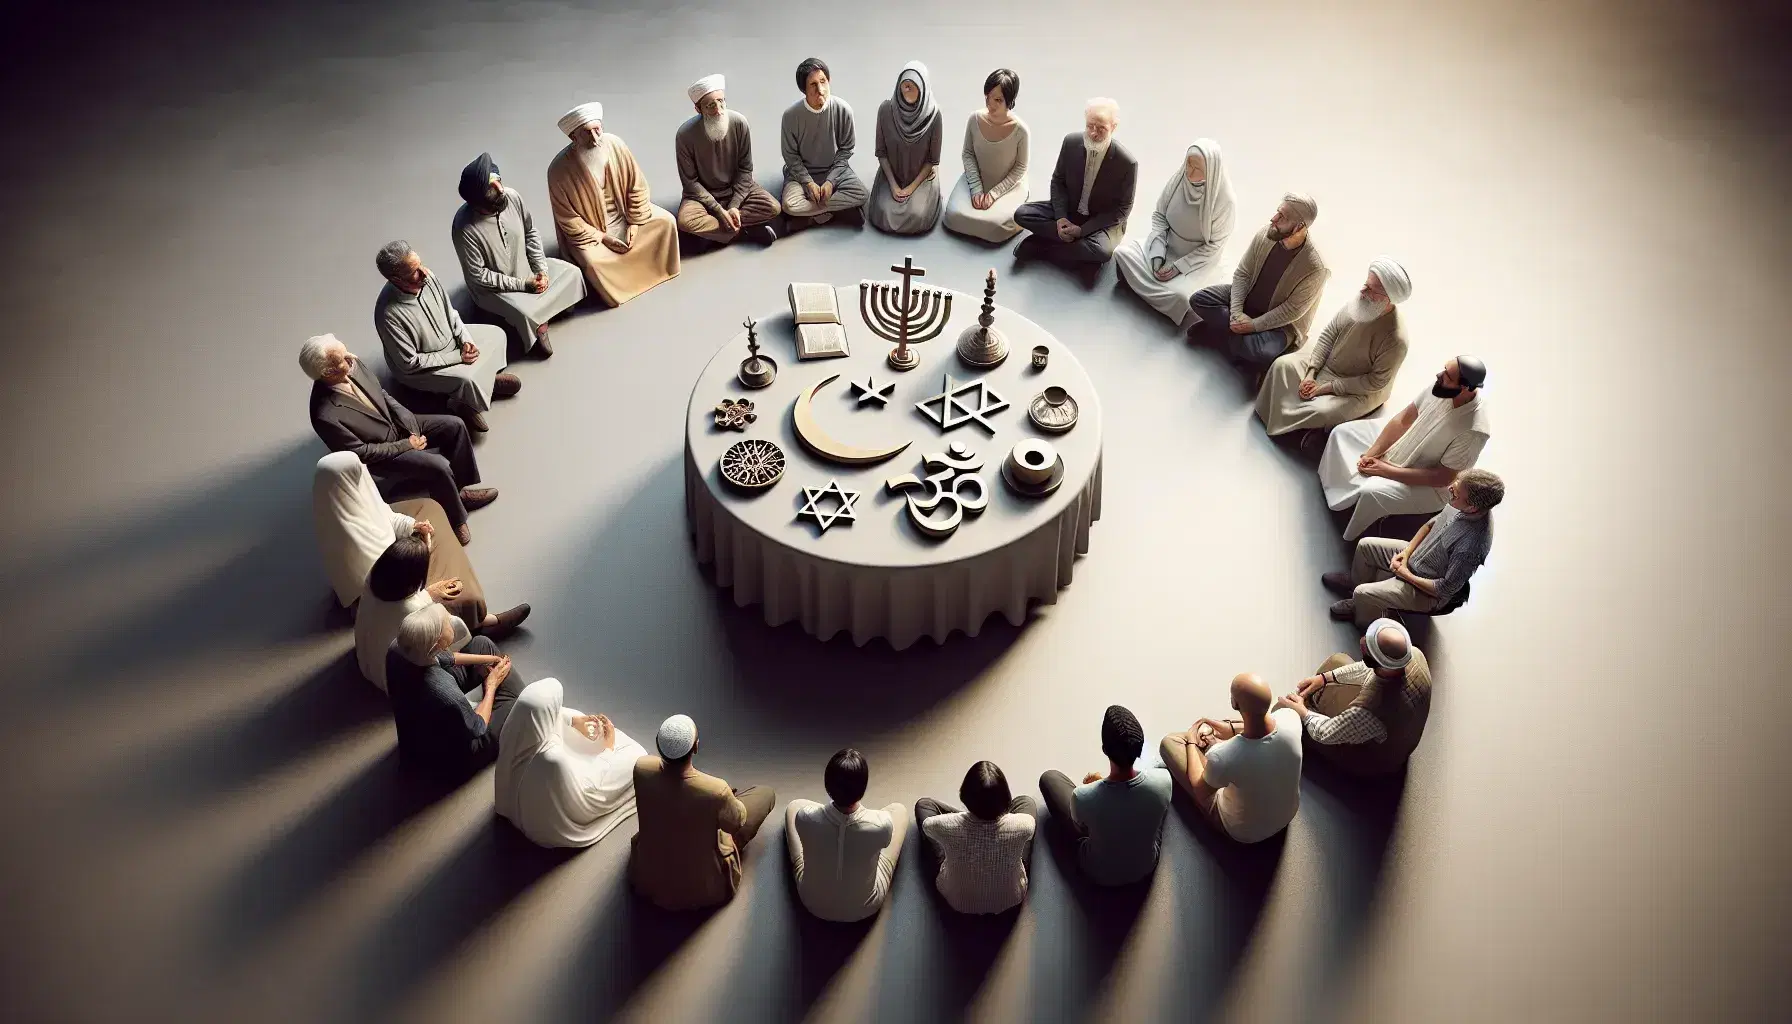 Multi-ethnic group sitting in semi-circle discussing around a table with religious symbols such as cross, menorah, crescent moon, Om, Dharma wheel and khanda.